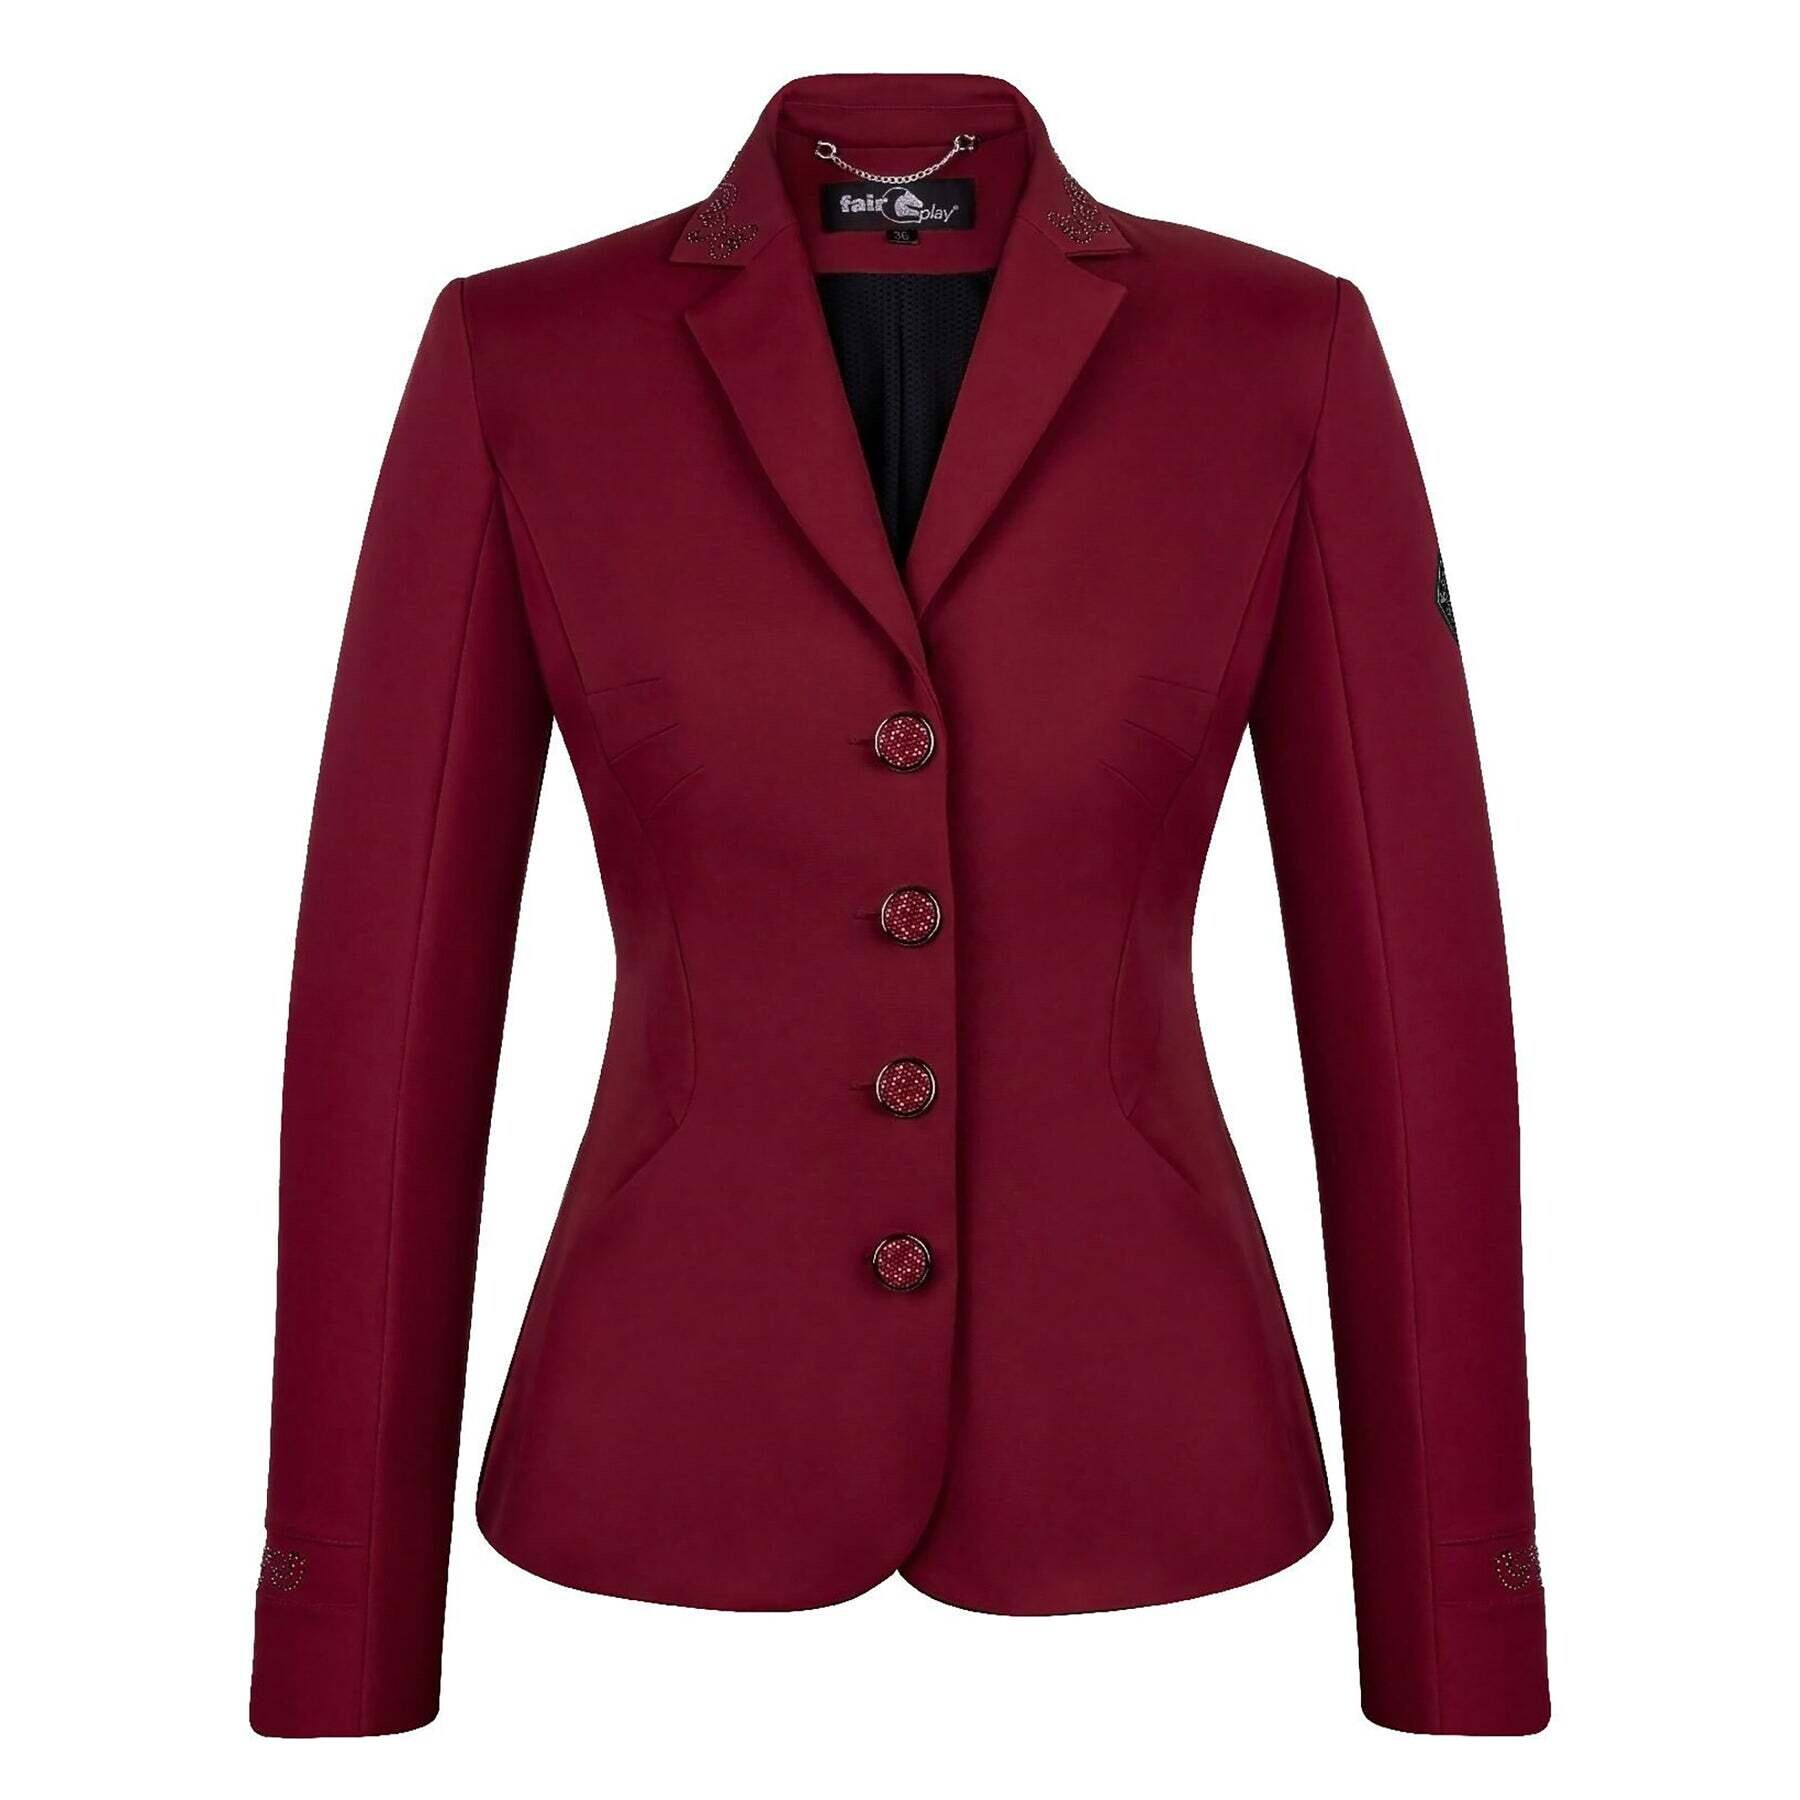 Women's competition jacket Fair Play Taylor Chic